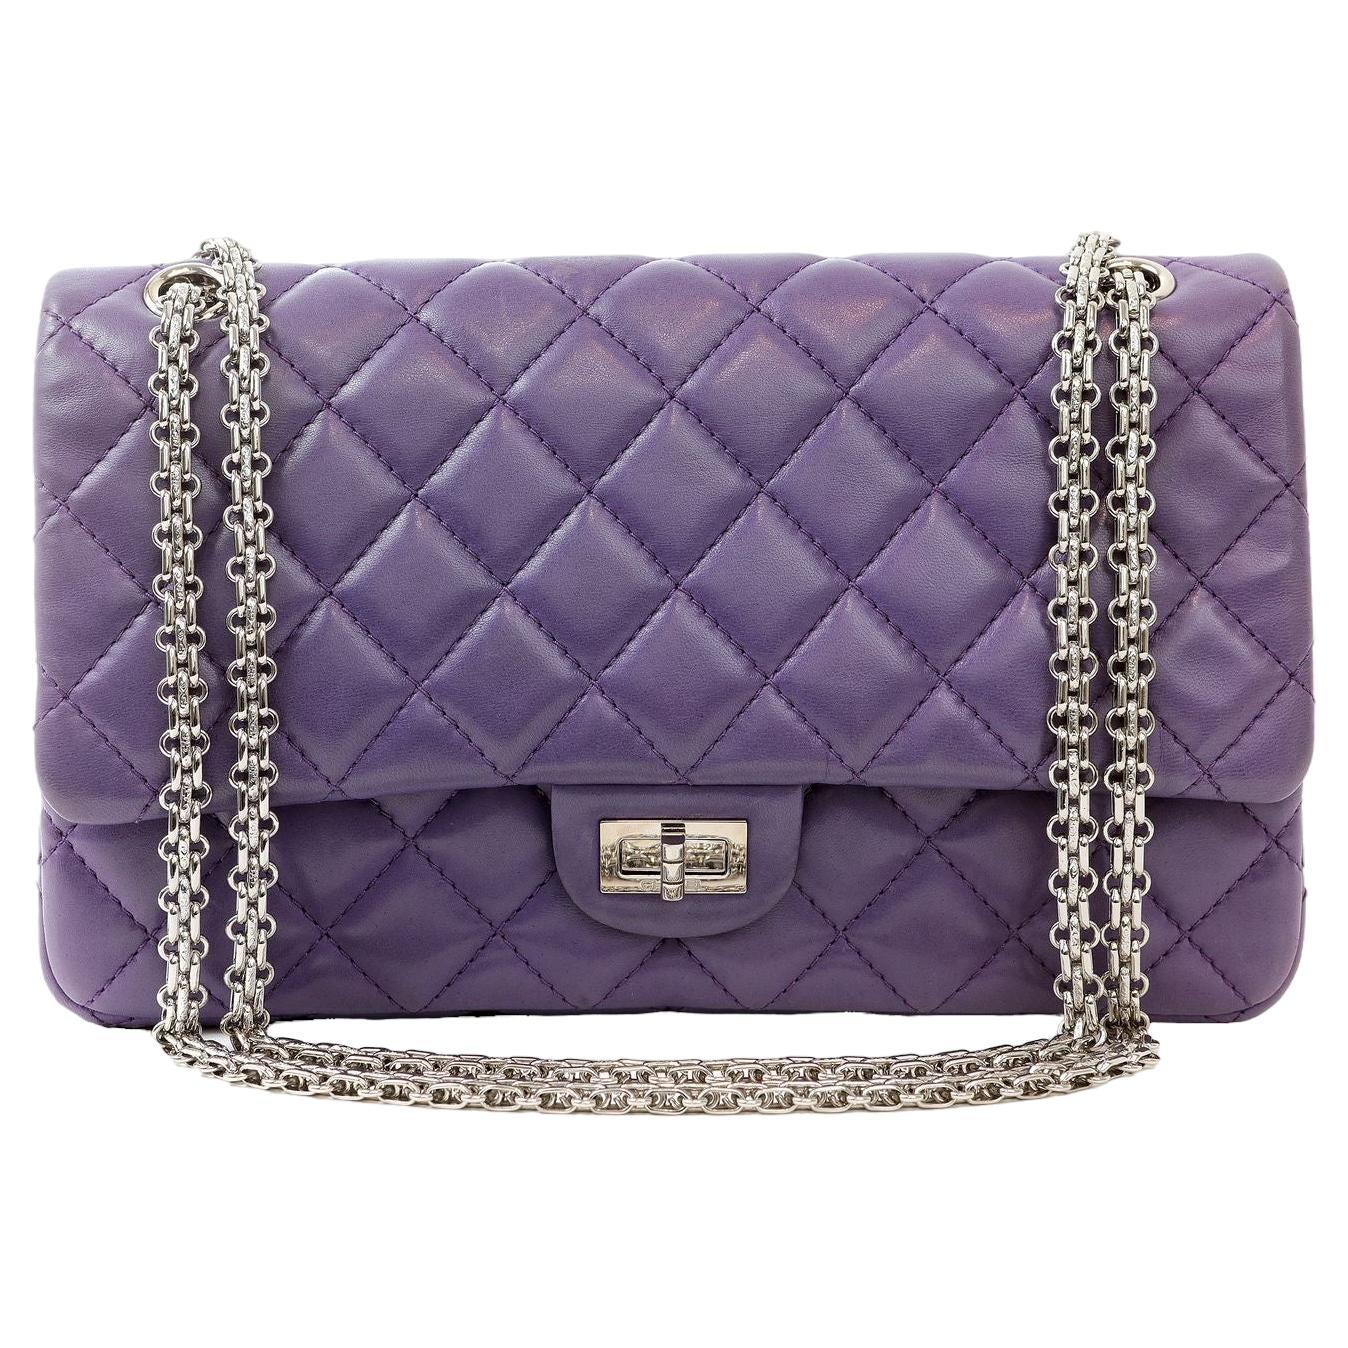 Chanel Purple Lambskin 2.55 Medium Classic Flap with Silver Hardware For Sale